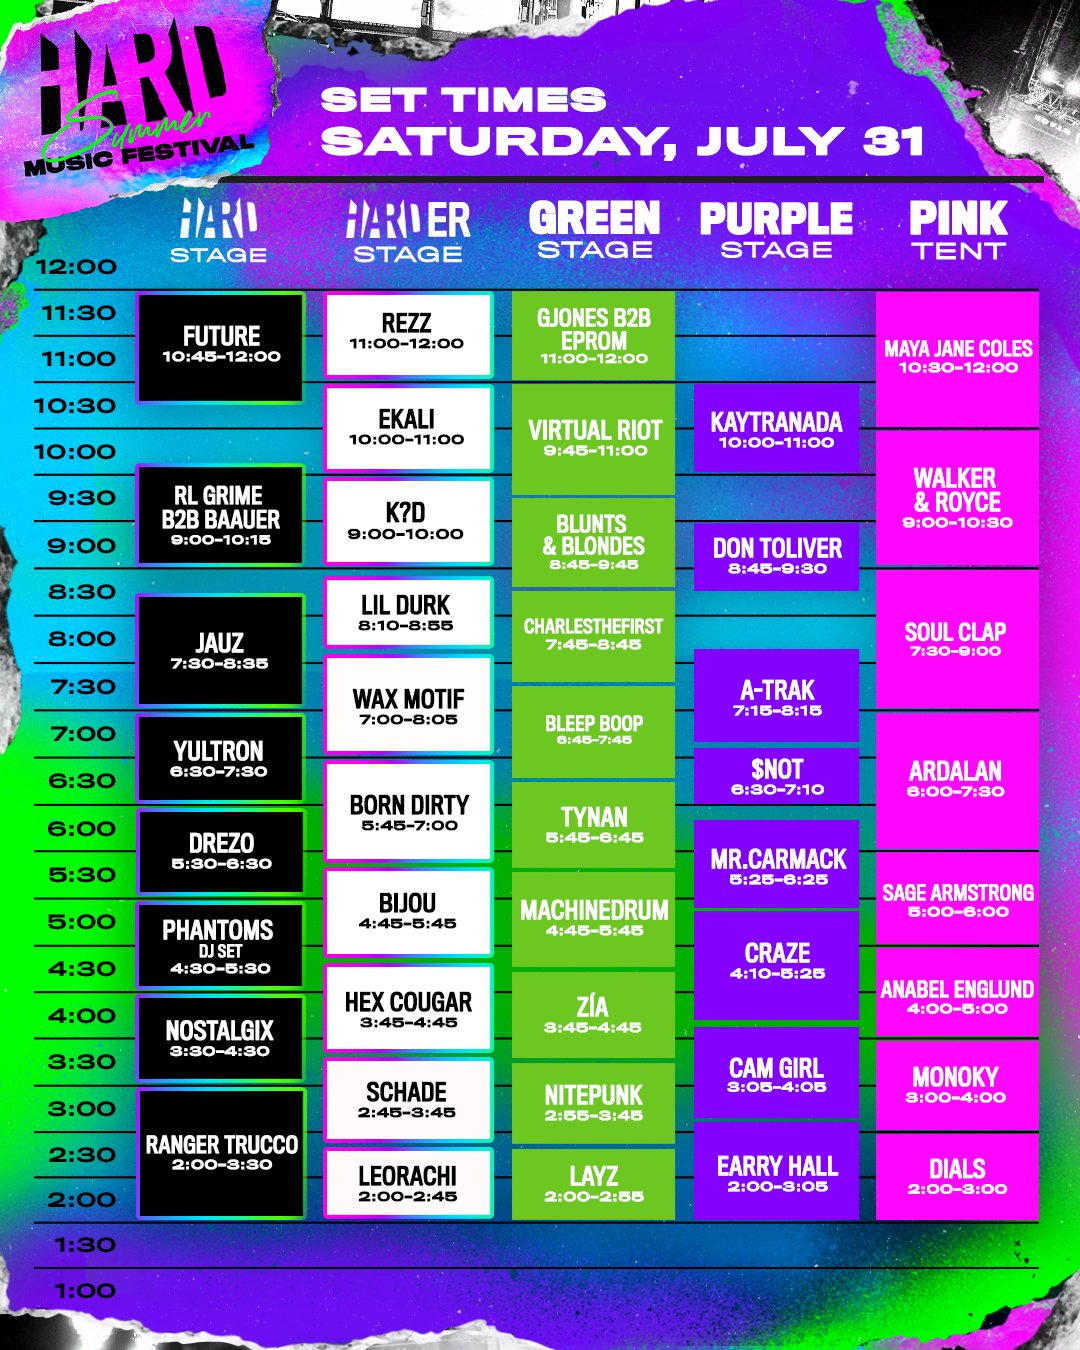 Plan Your Weekend With Set Times for Hard Summer 2021